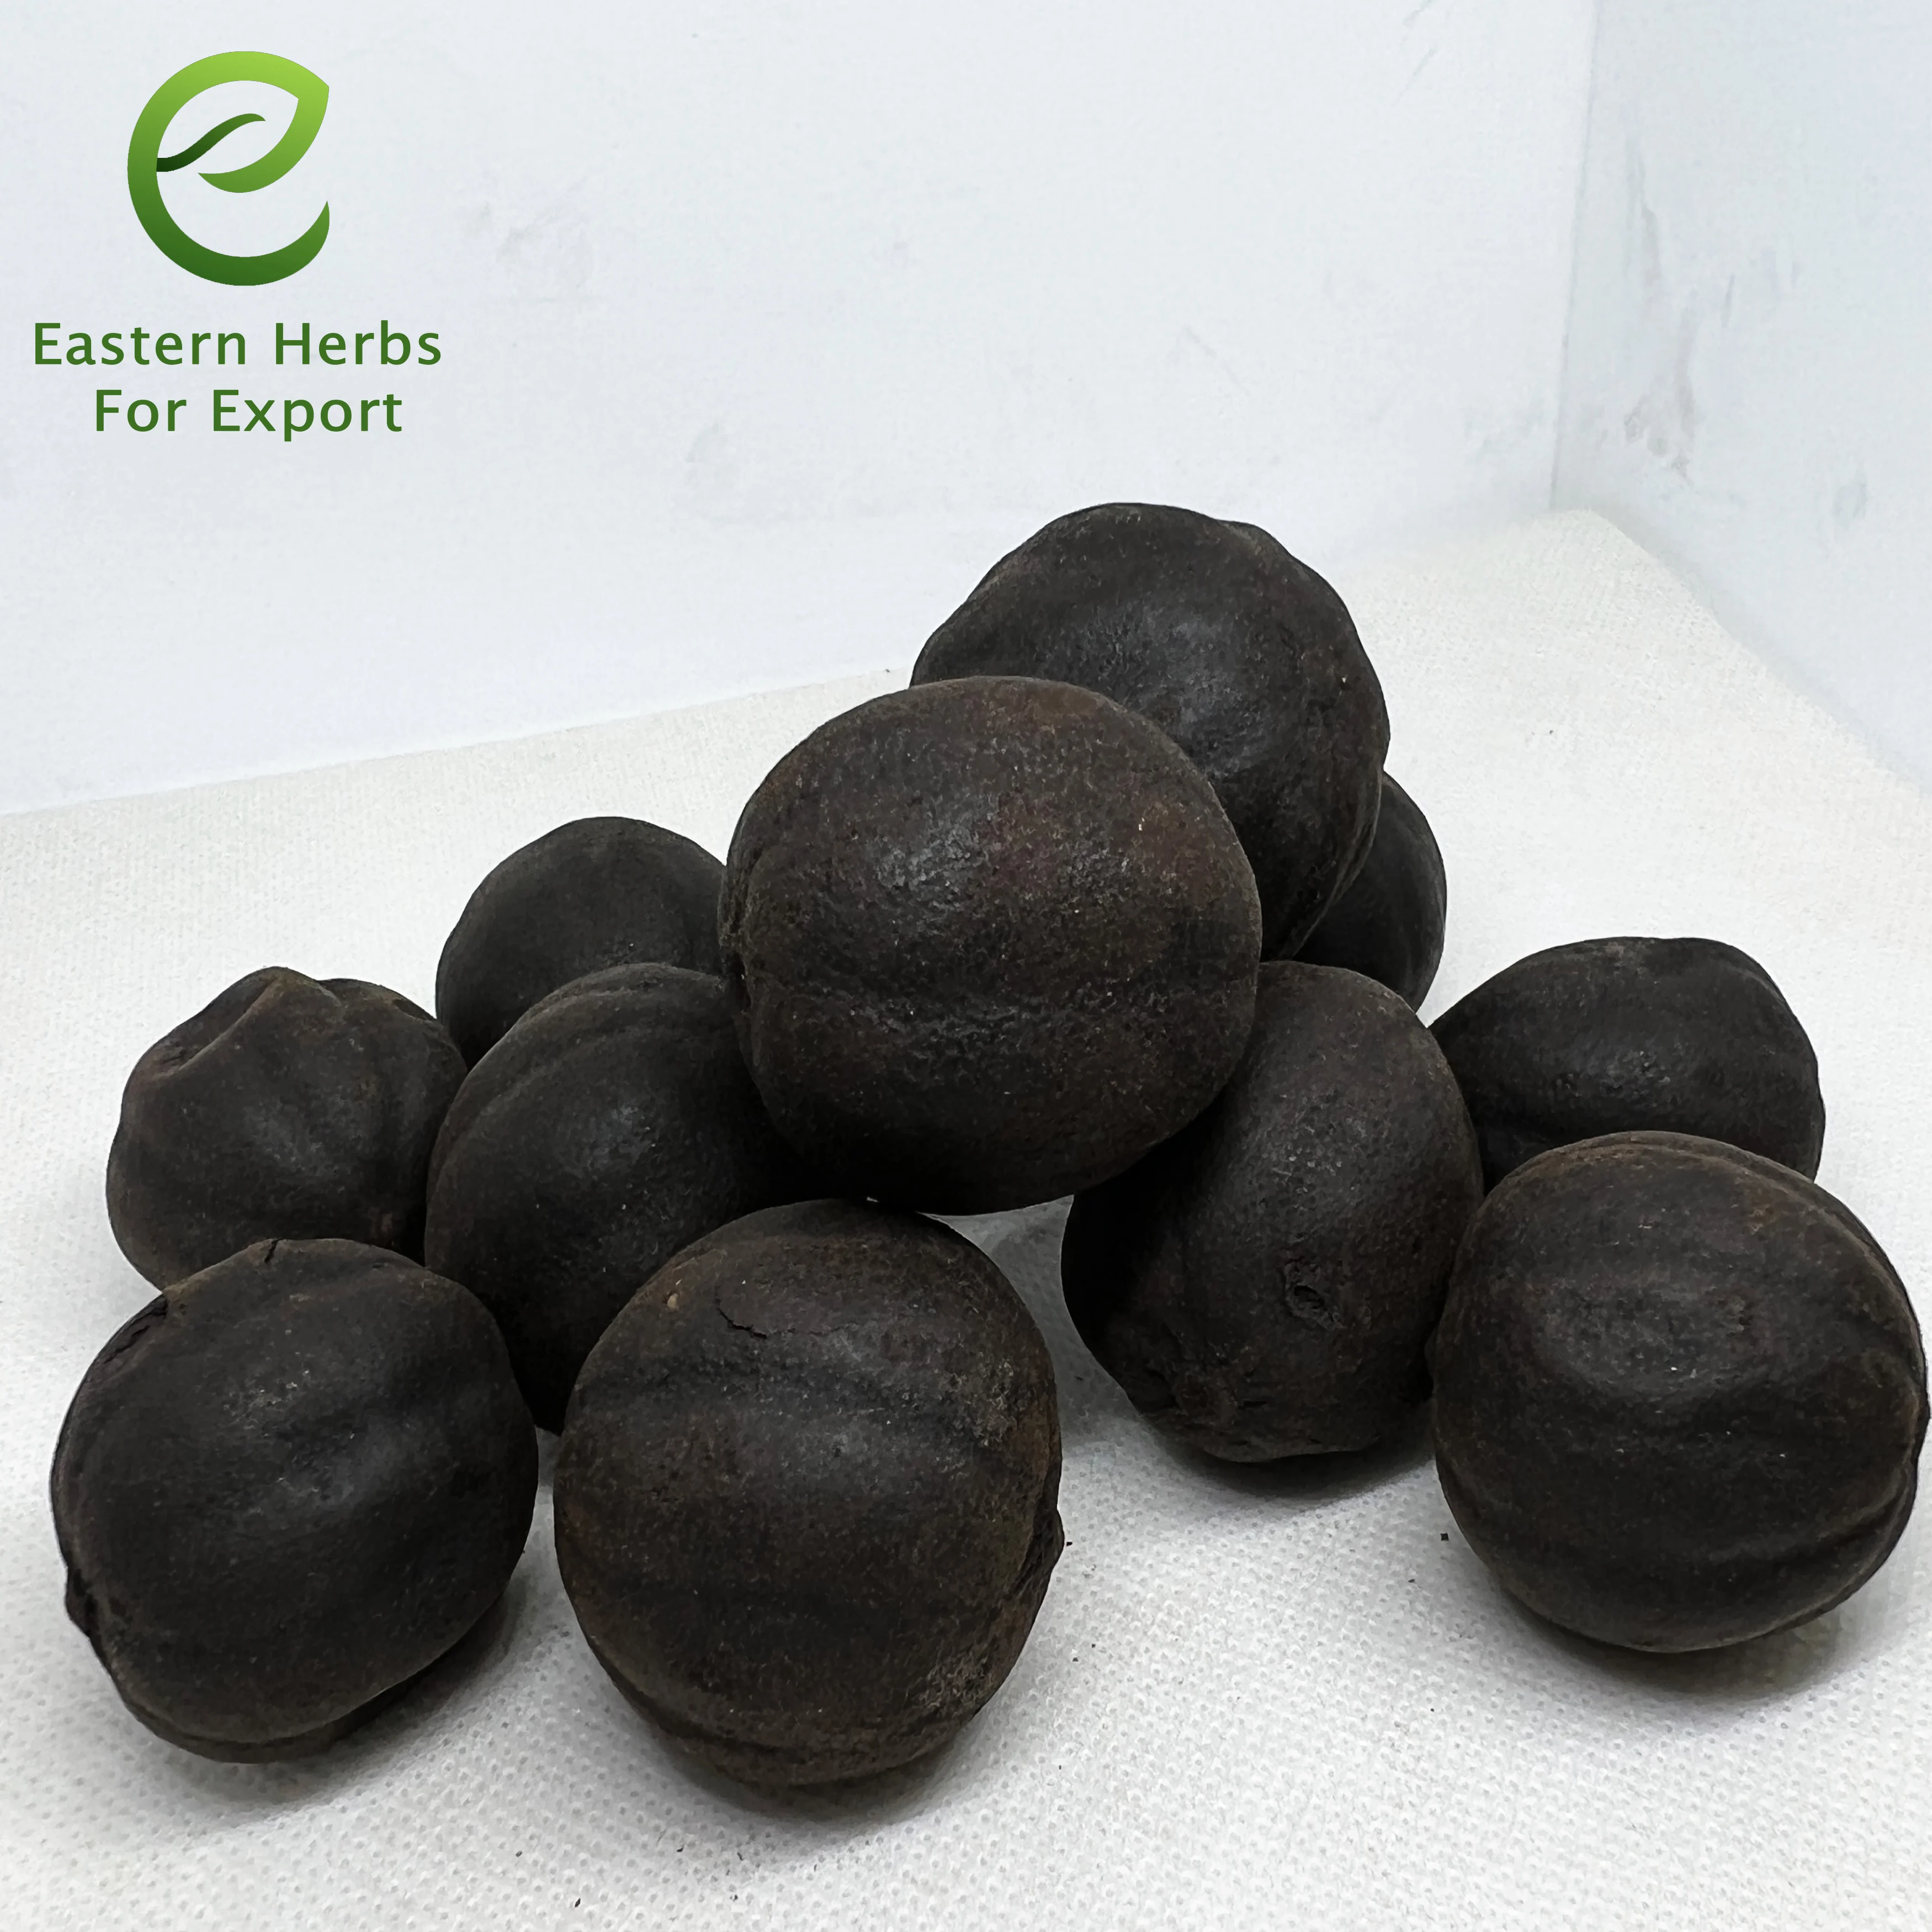 DRY BLACK LEMON  from Egypt and pure Free of anything strange (11000006250323)